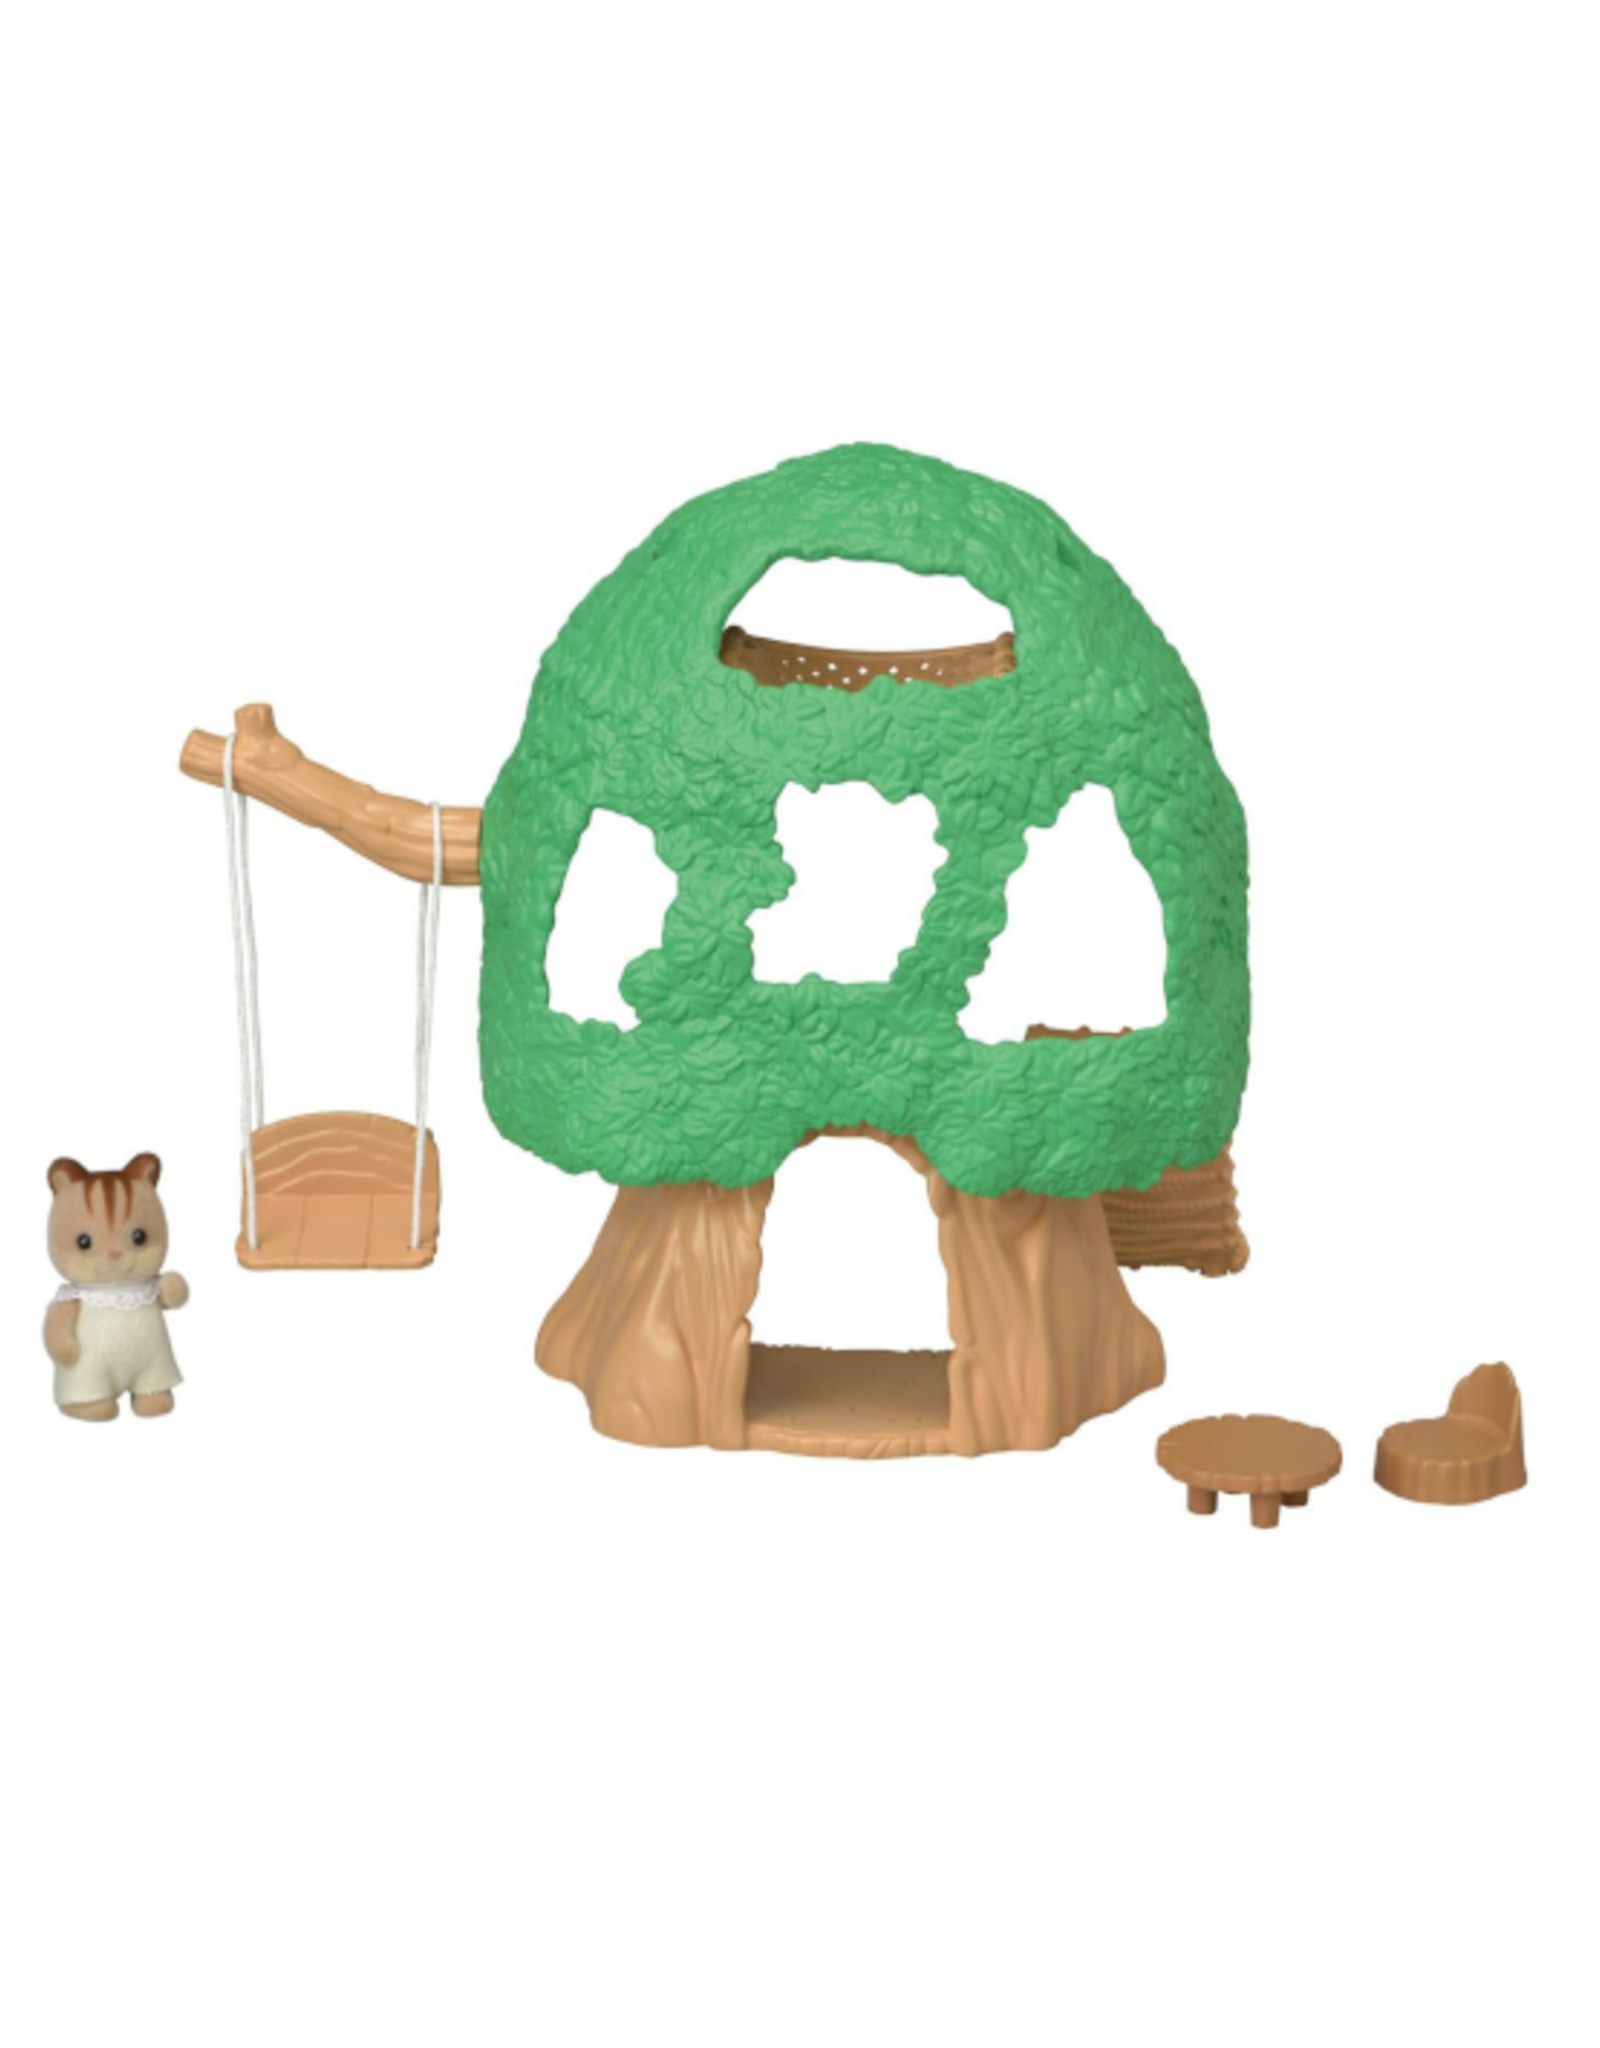 Calico Critters Calico Critters - Baby Tree House